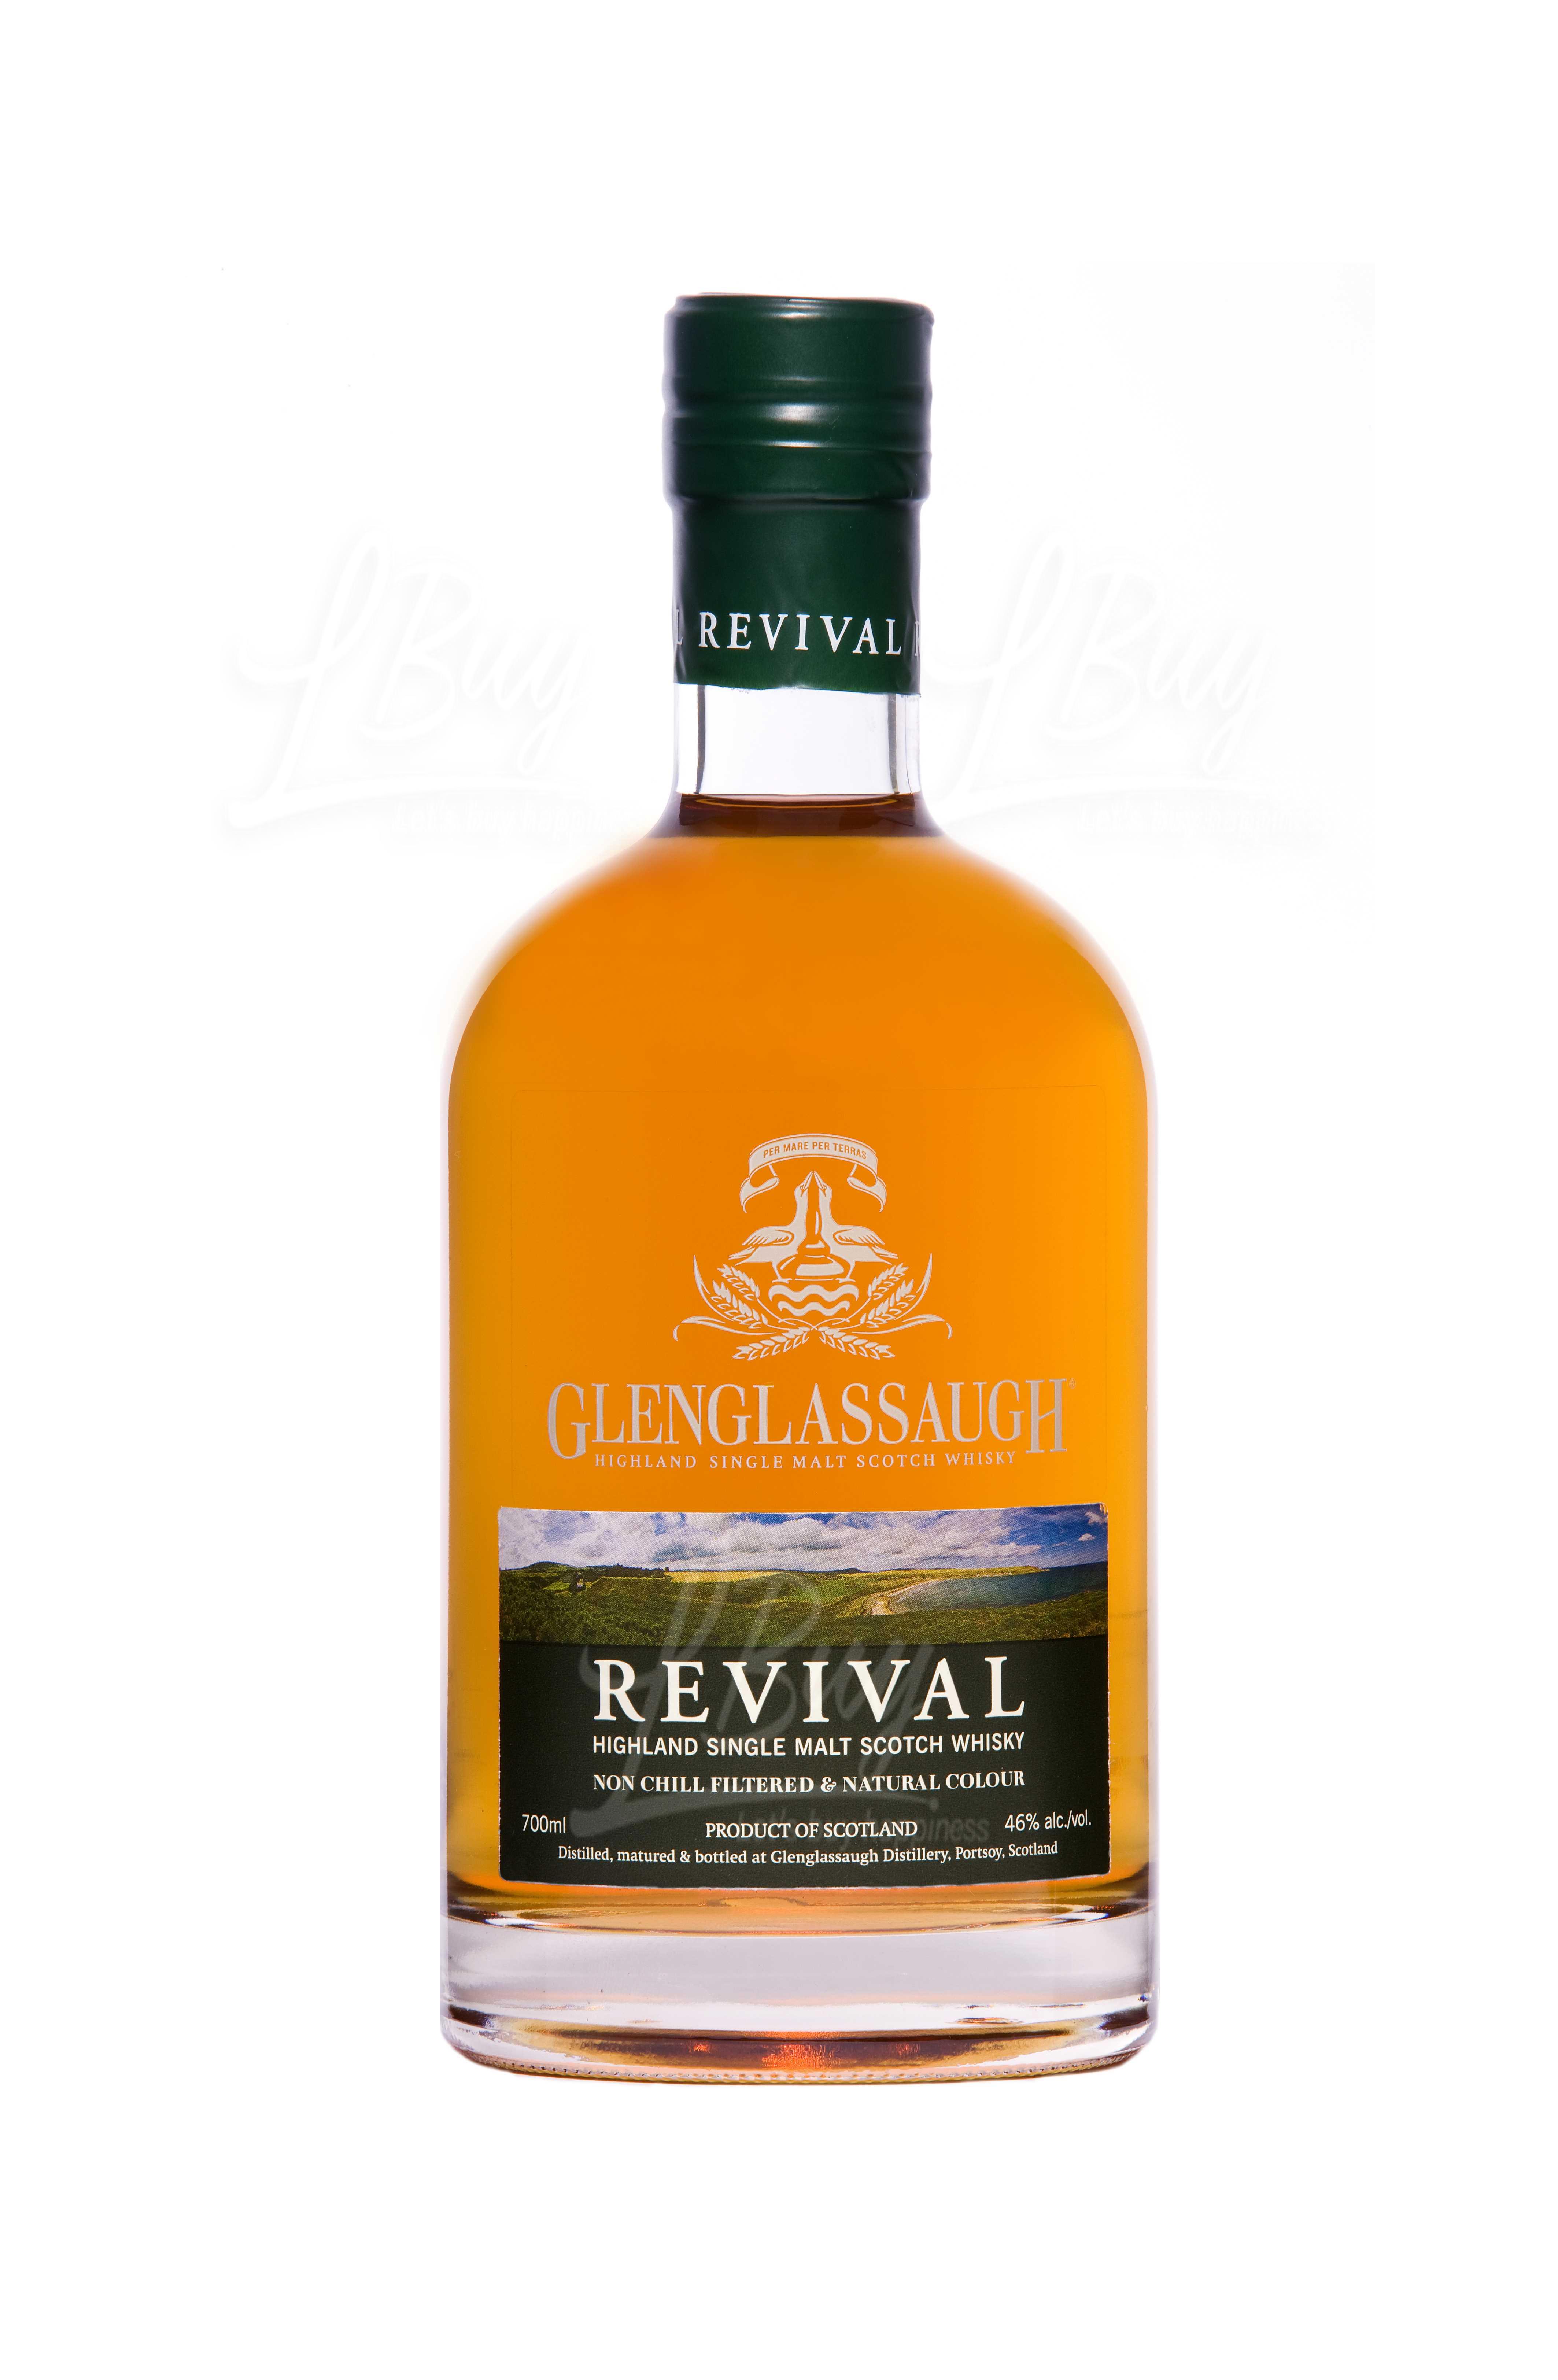 The GlenDronach Revival Aged 15 Years